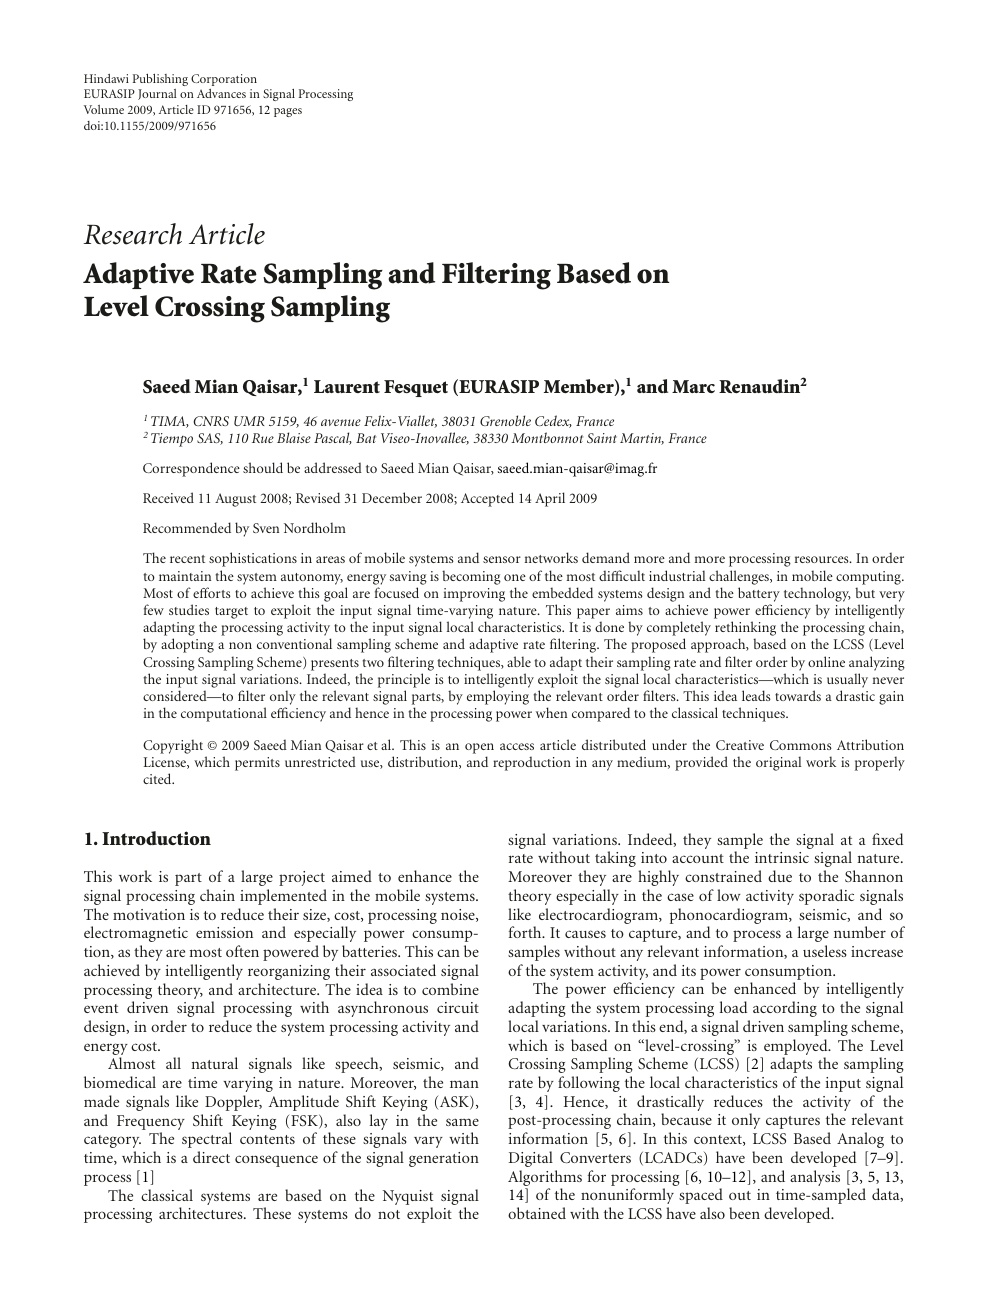 Adaptive Rate Sampling And Filtering Based On Level Crossing Sampling Topic Of Research Paper In Electrical Engineering Electronic Engineering Information Engineering Download Scholarly Article Pdf And Read For Free On Cyberleninka